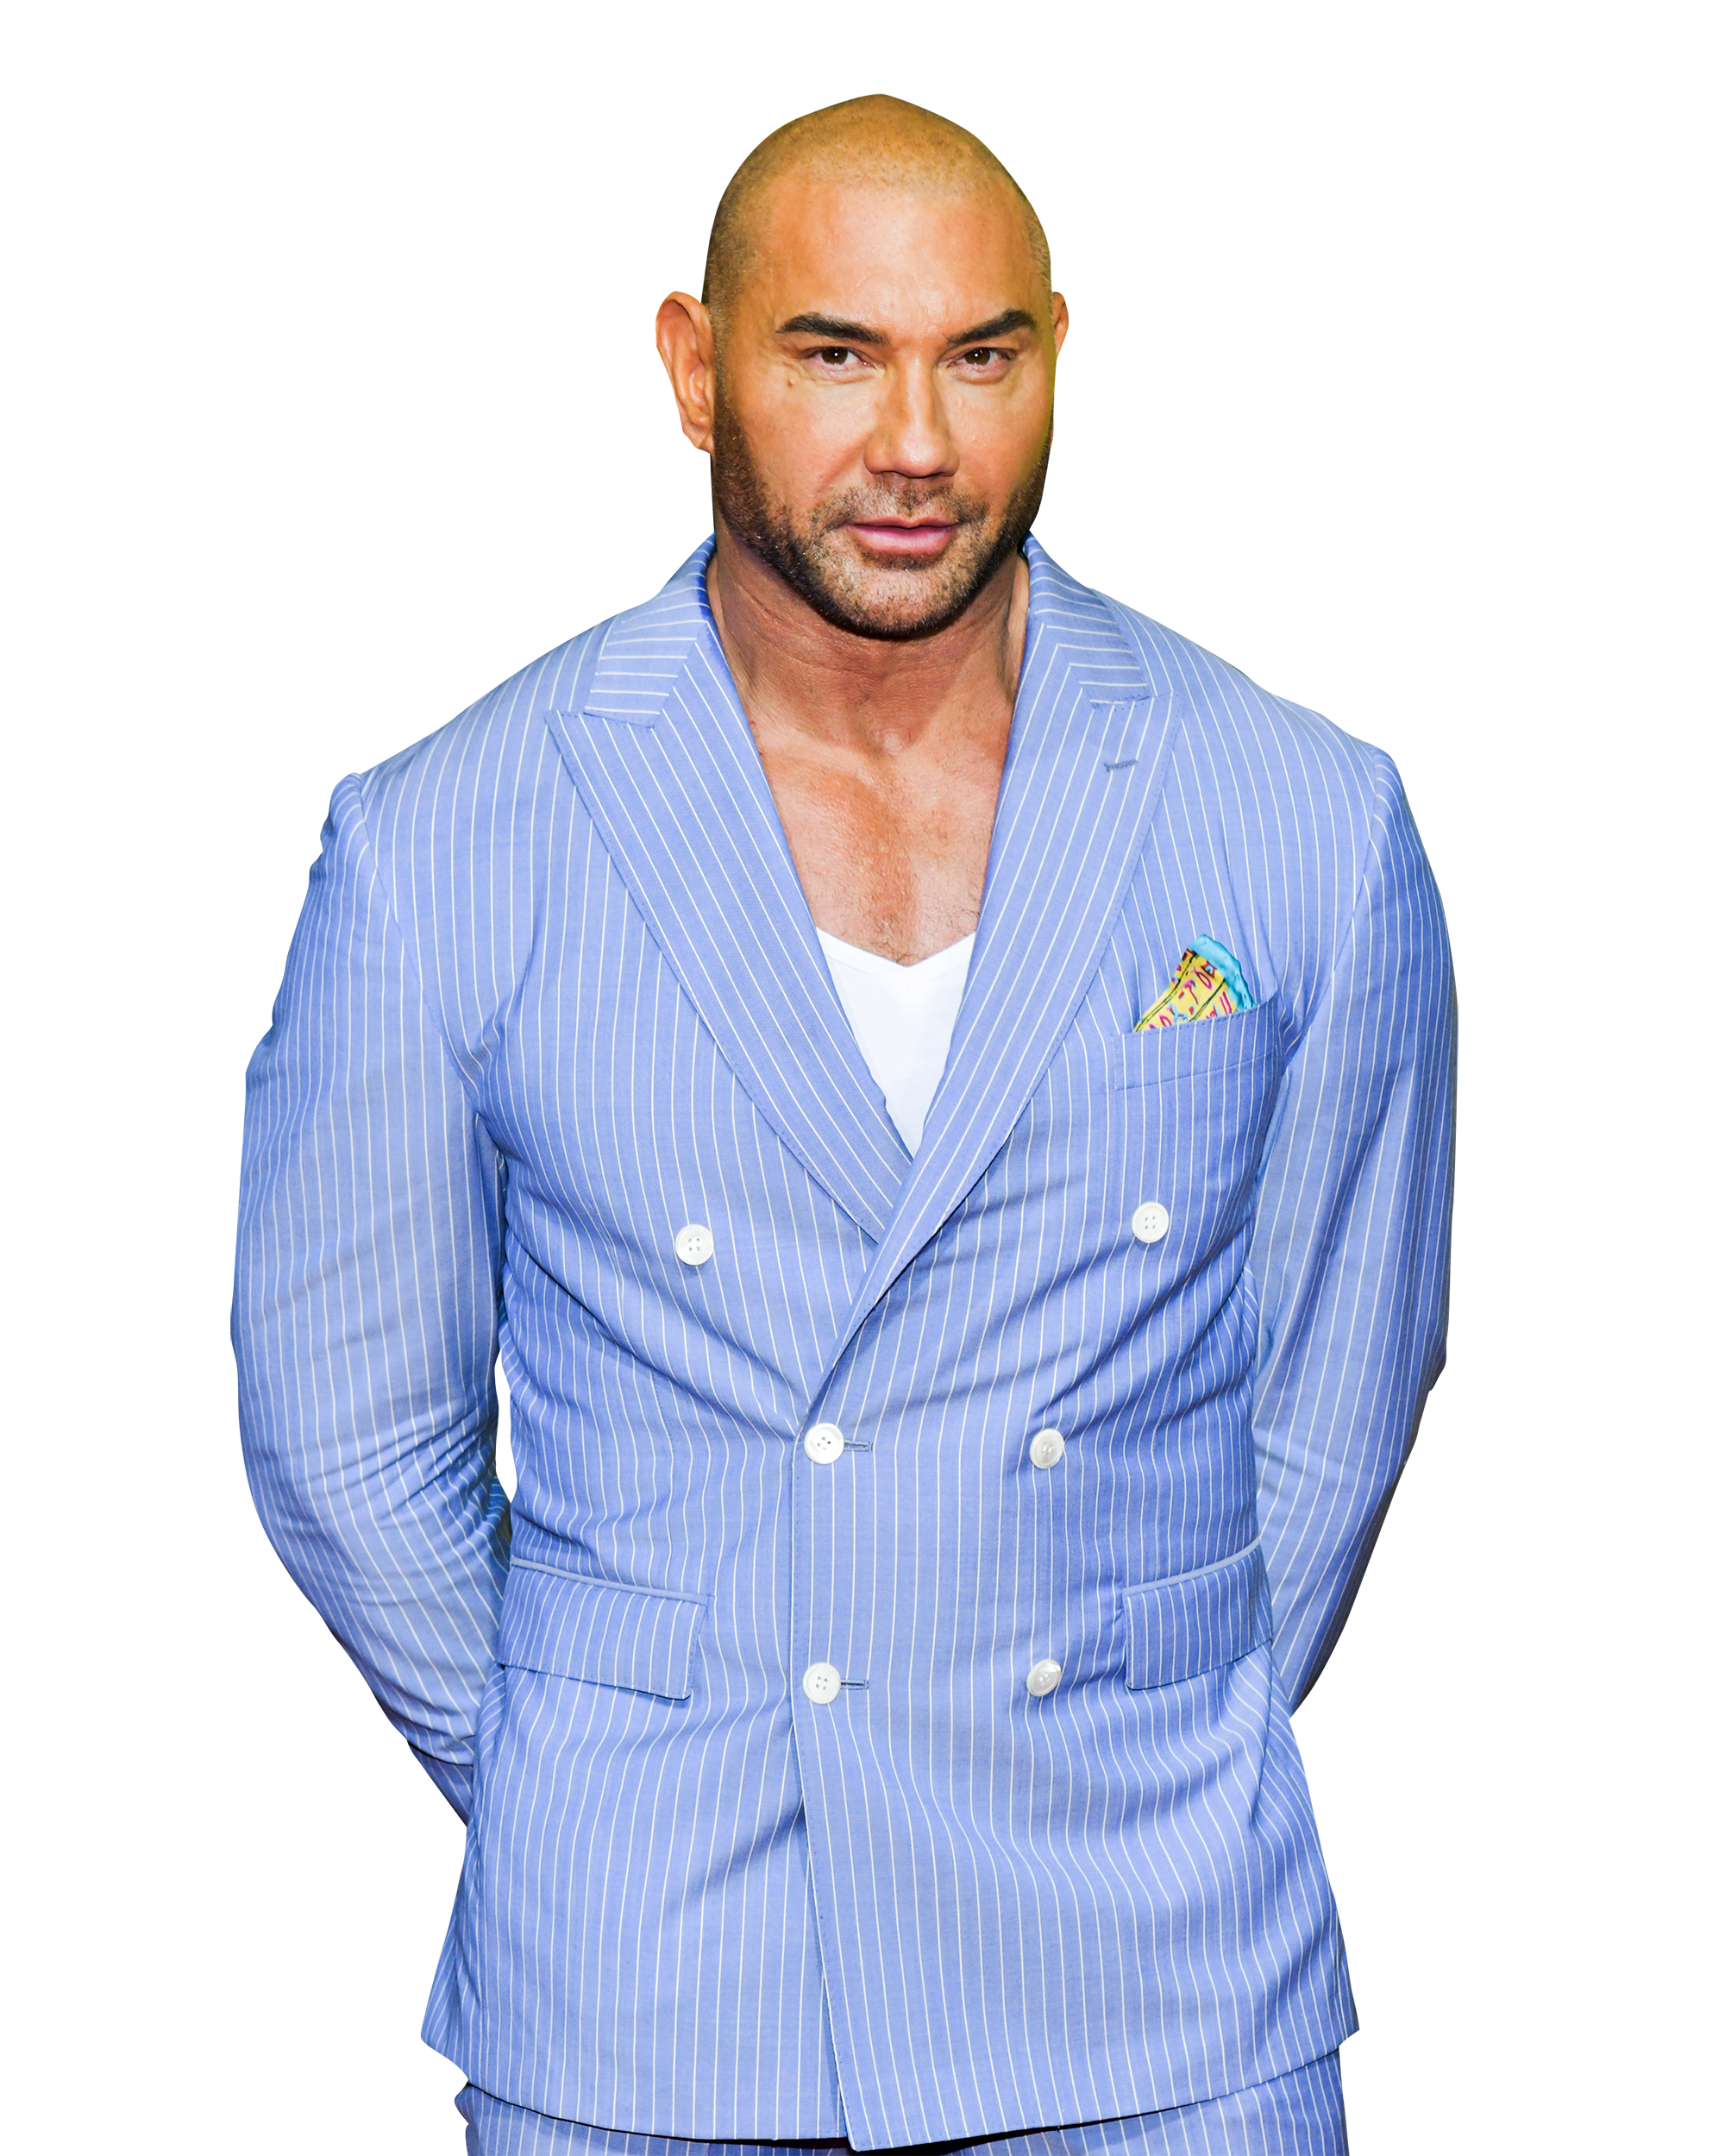 Army of the Dead star Dave Bautista to lead new sci-fi adventure movie  Universe's Most Wanted